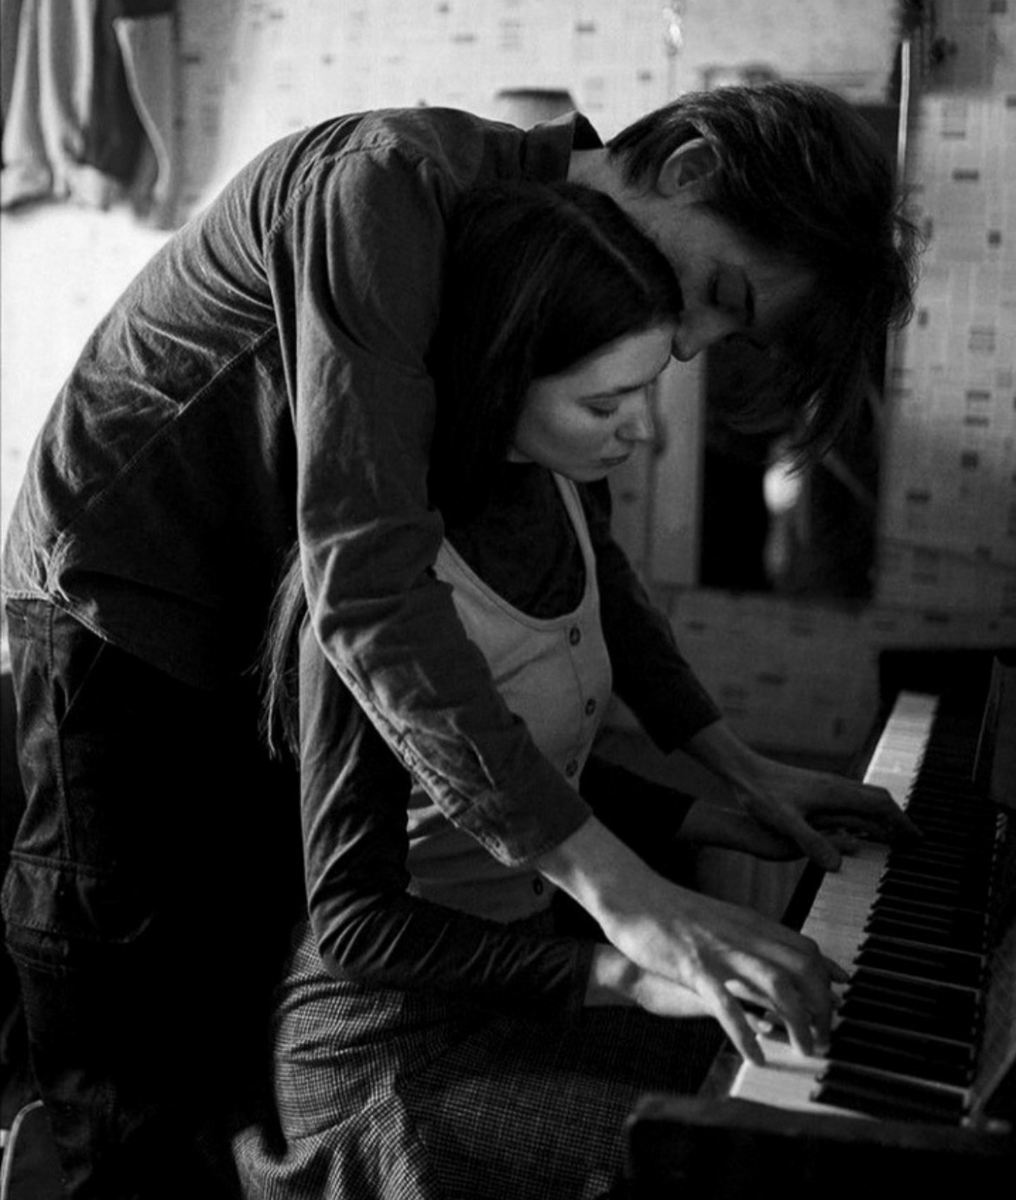 “Love is like playing the piano. First, you must play by the rules, then you must forget the rules, and play by your heart..”